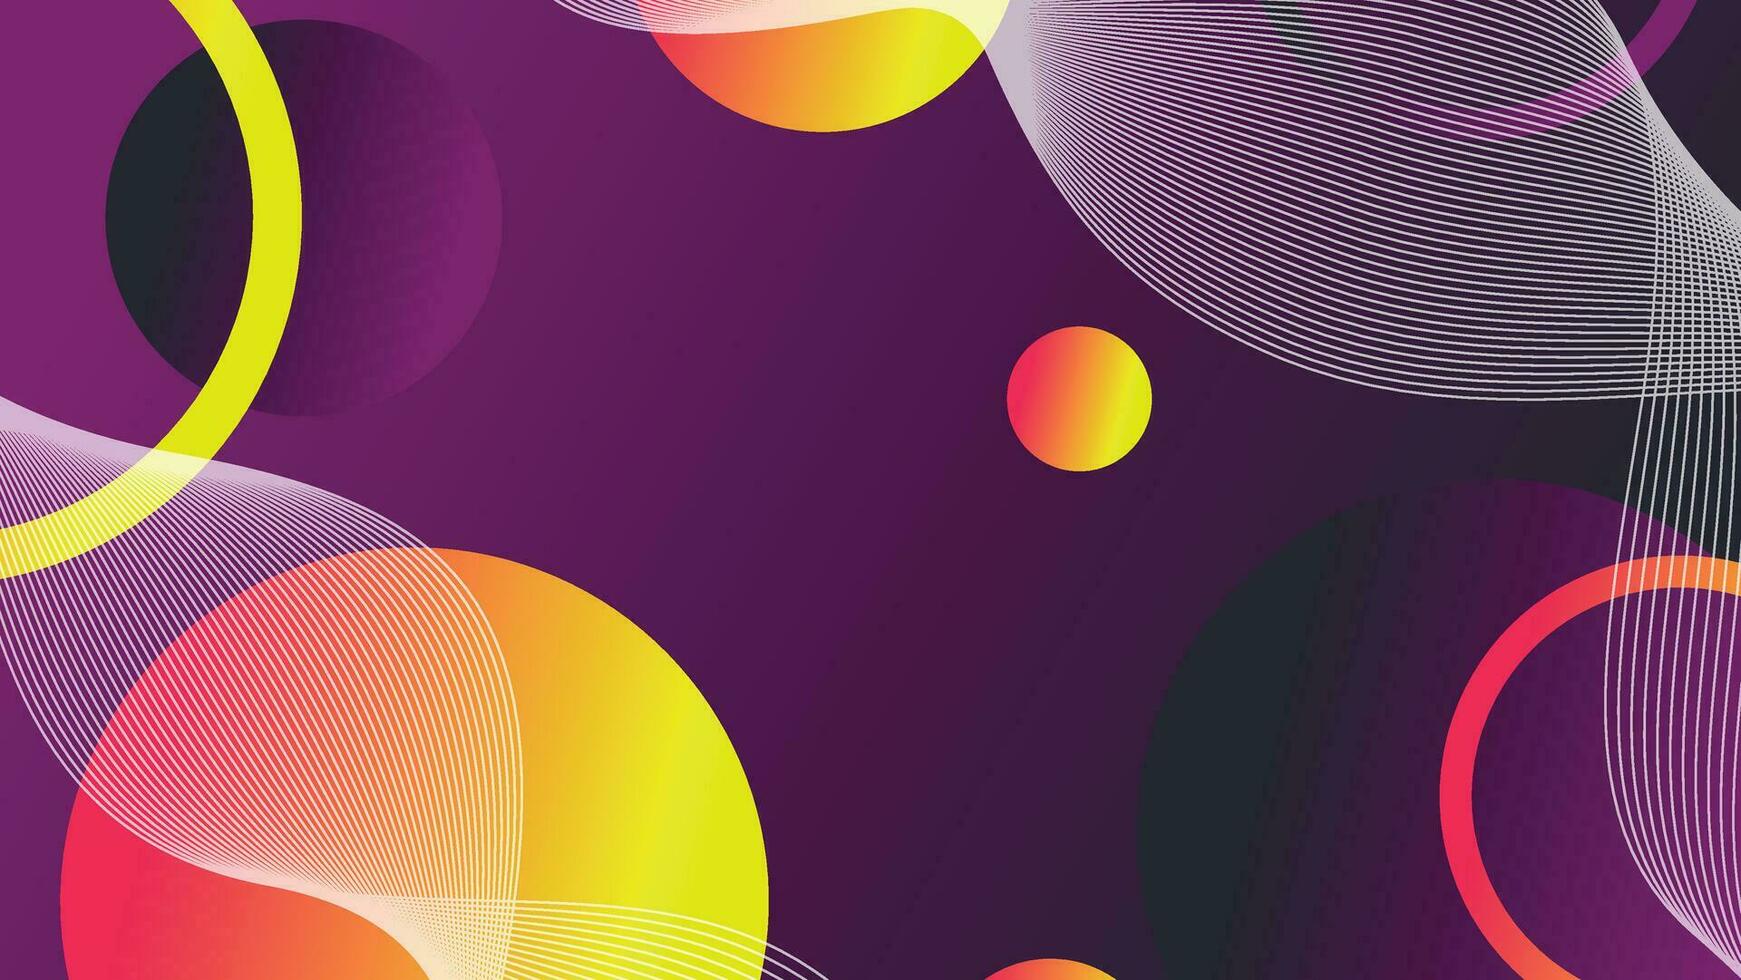 Abstract minimal gradient geometric circle background vector